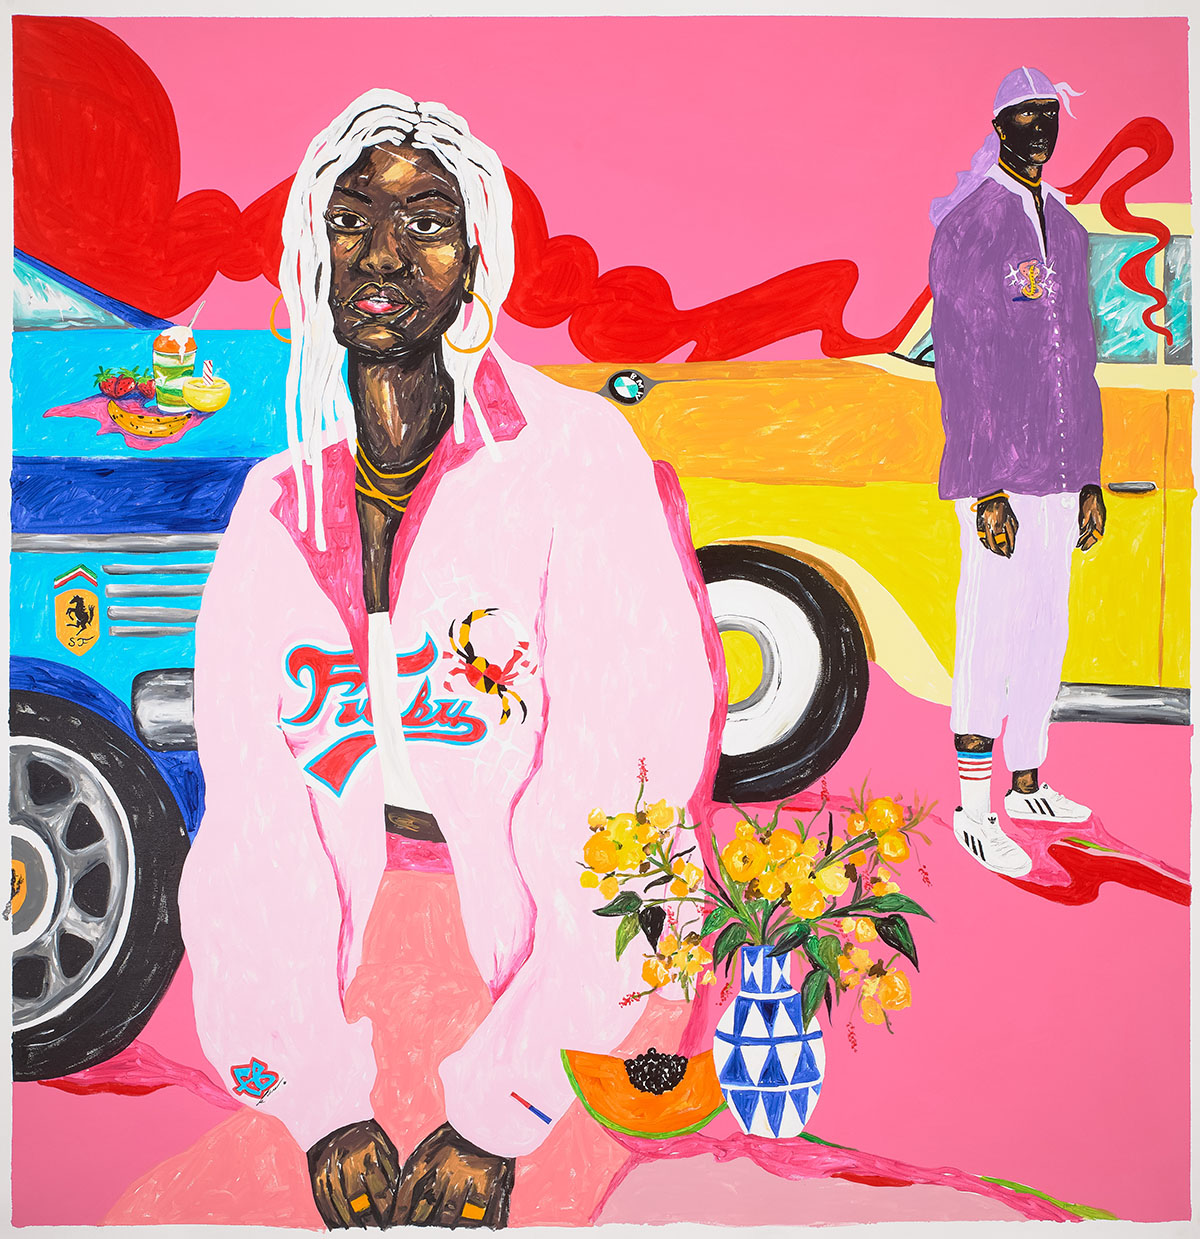 A painting of a Black woman wearing a pink jacket and sitting by fruit and flowers. In the background are two cars and a Black man wearing purple.